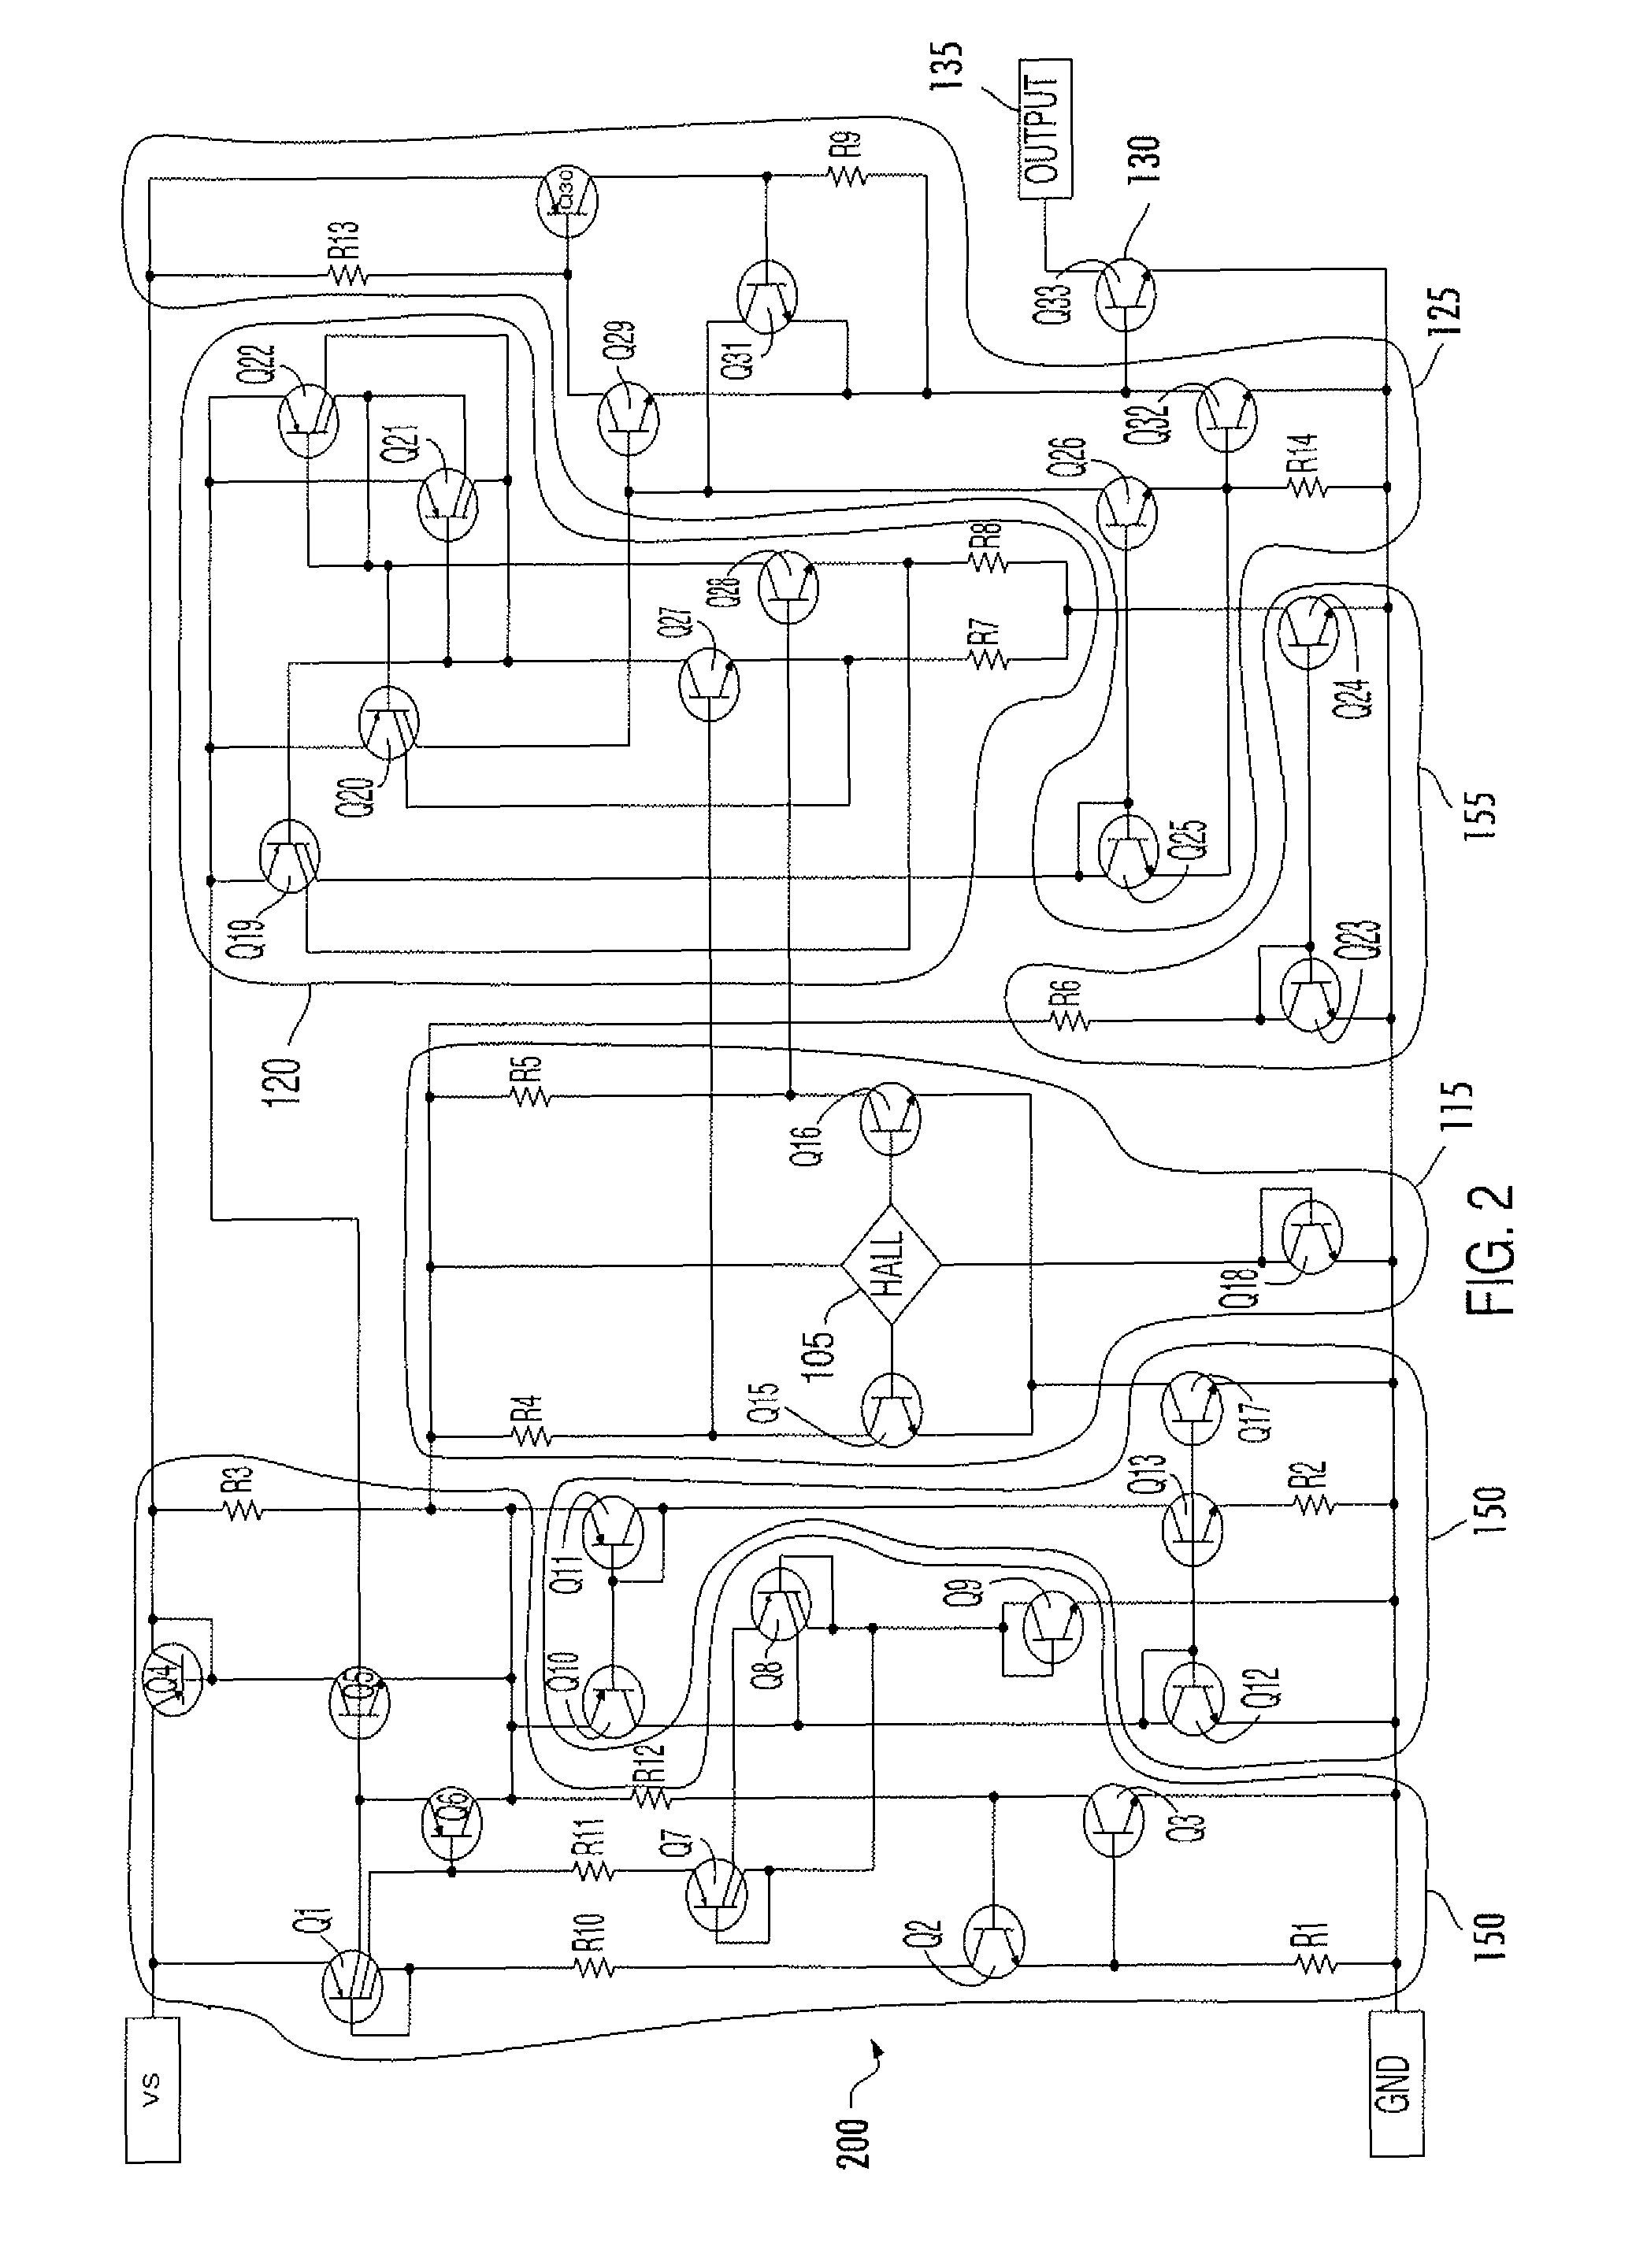 Comparator circuit having latching behavior and digital output sensors therefrom